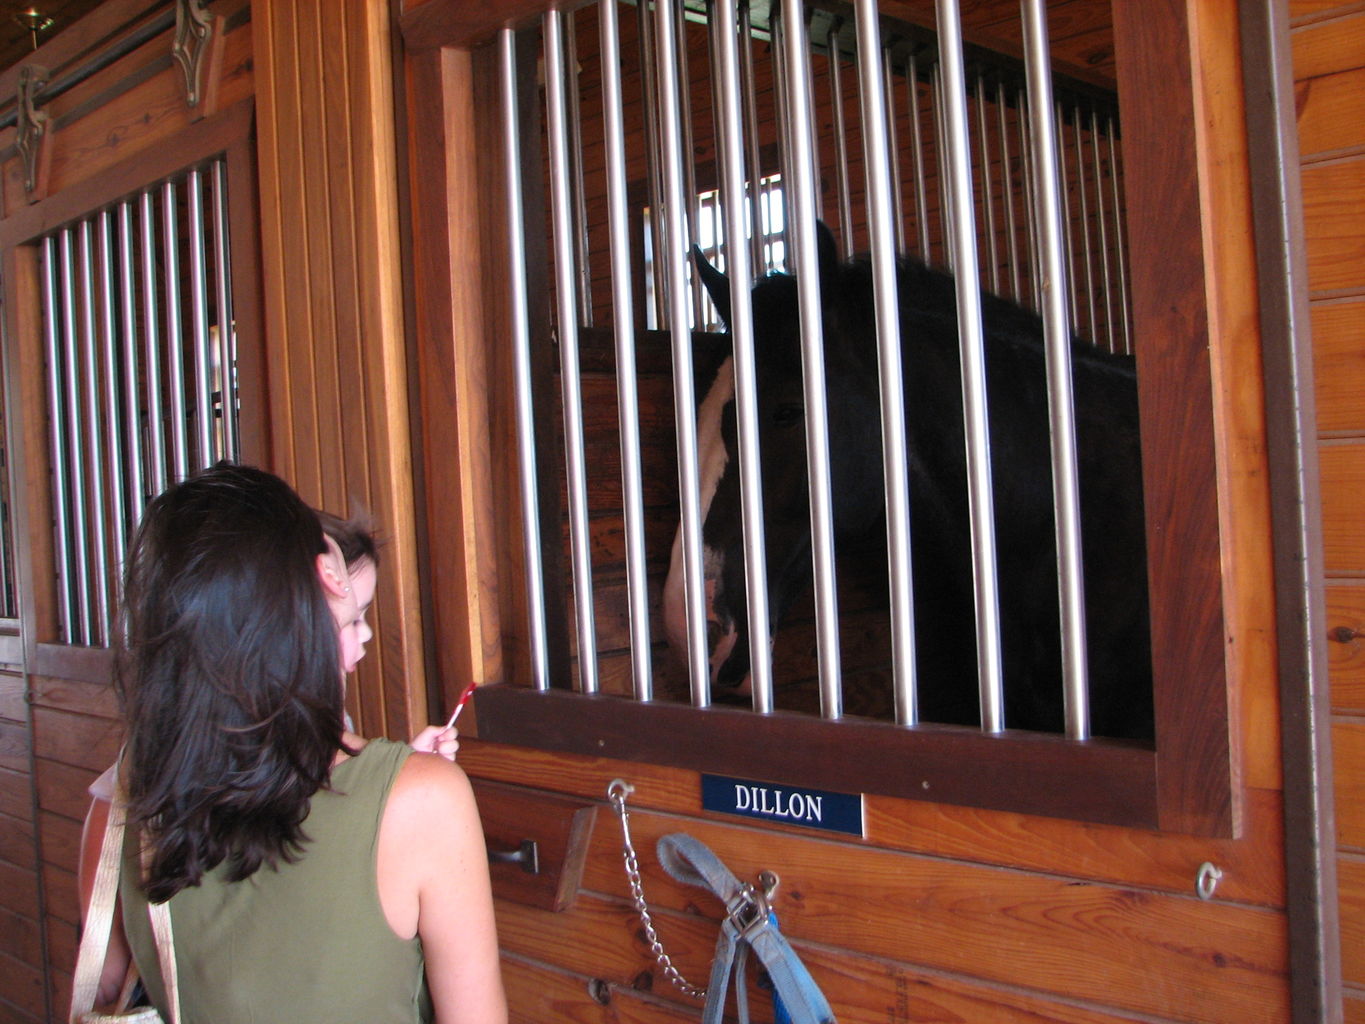 Visit to the Clydesdales
